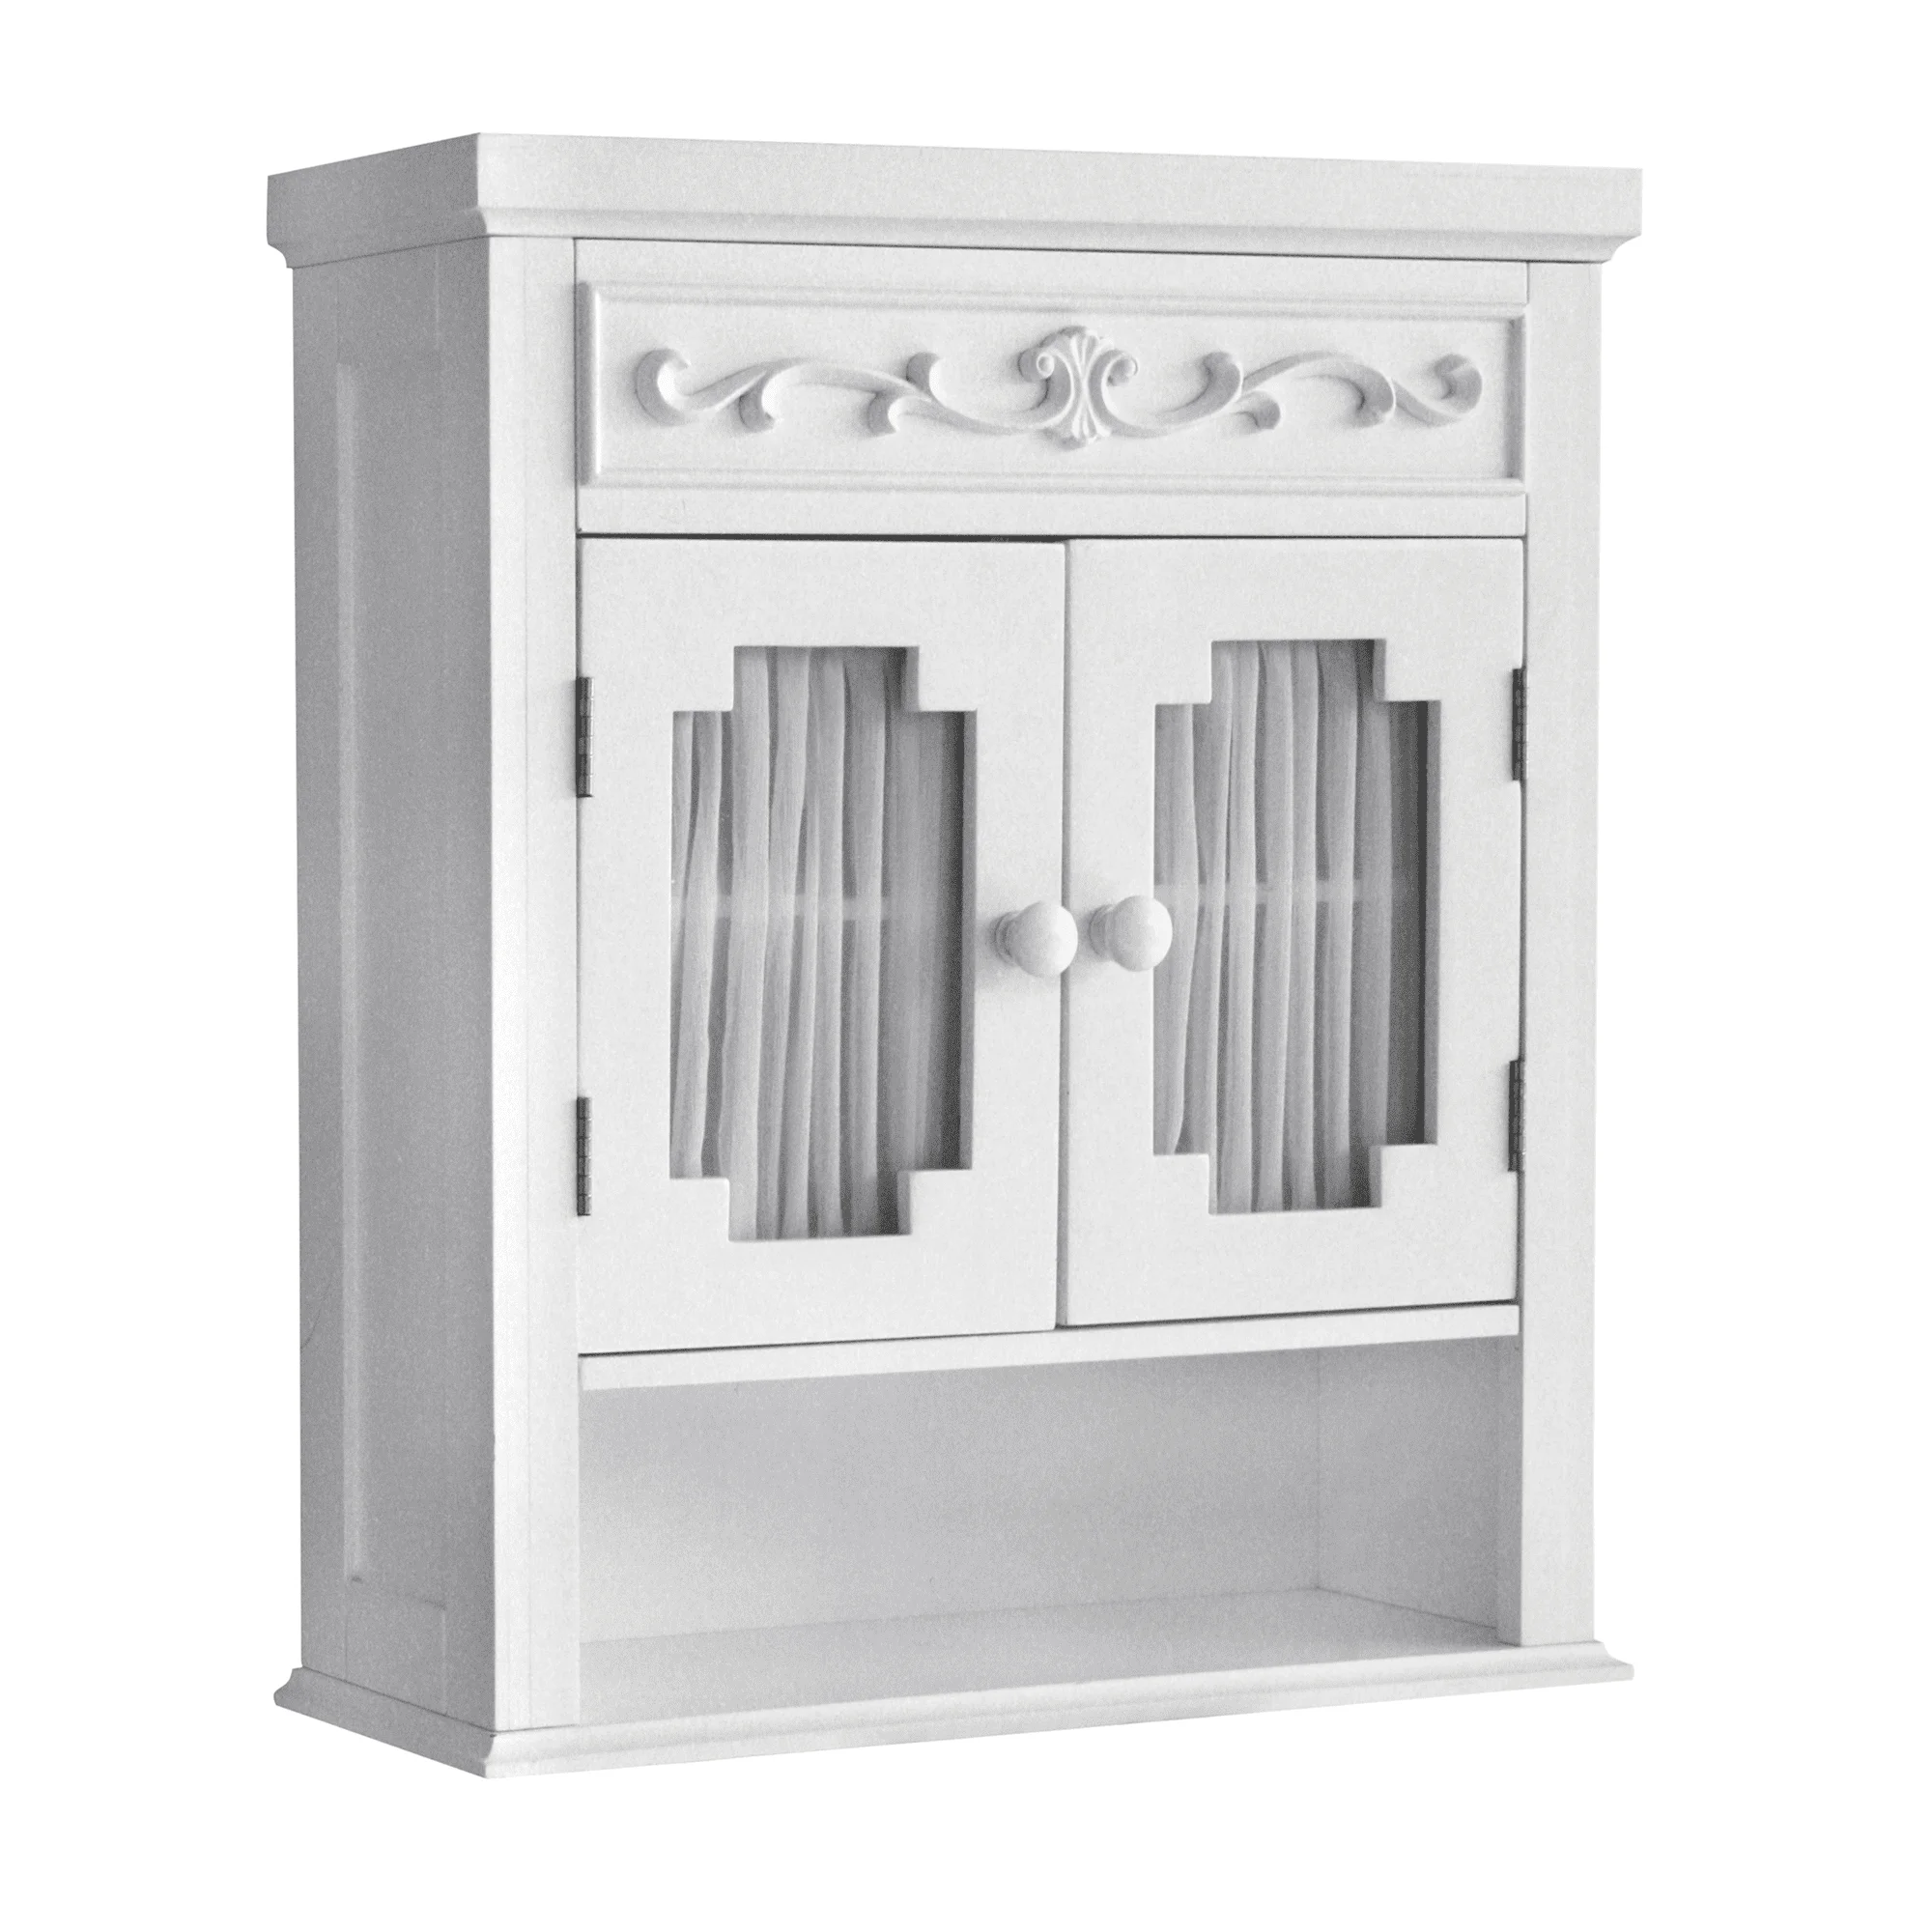 

Lisbon Removable Wooden Wall Cabinet with Drapery-Lined Doors, White